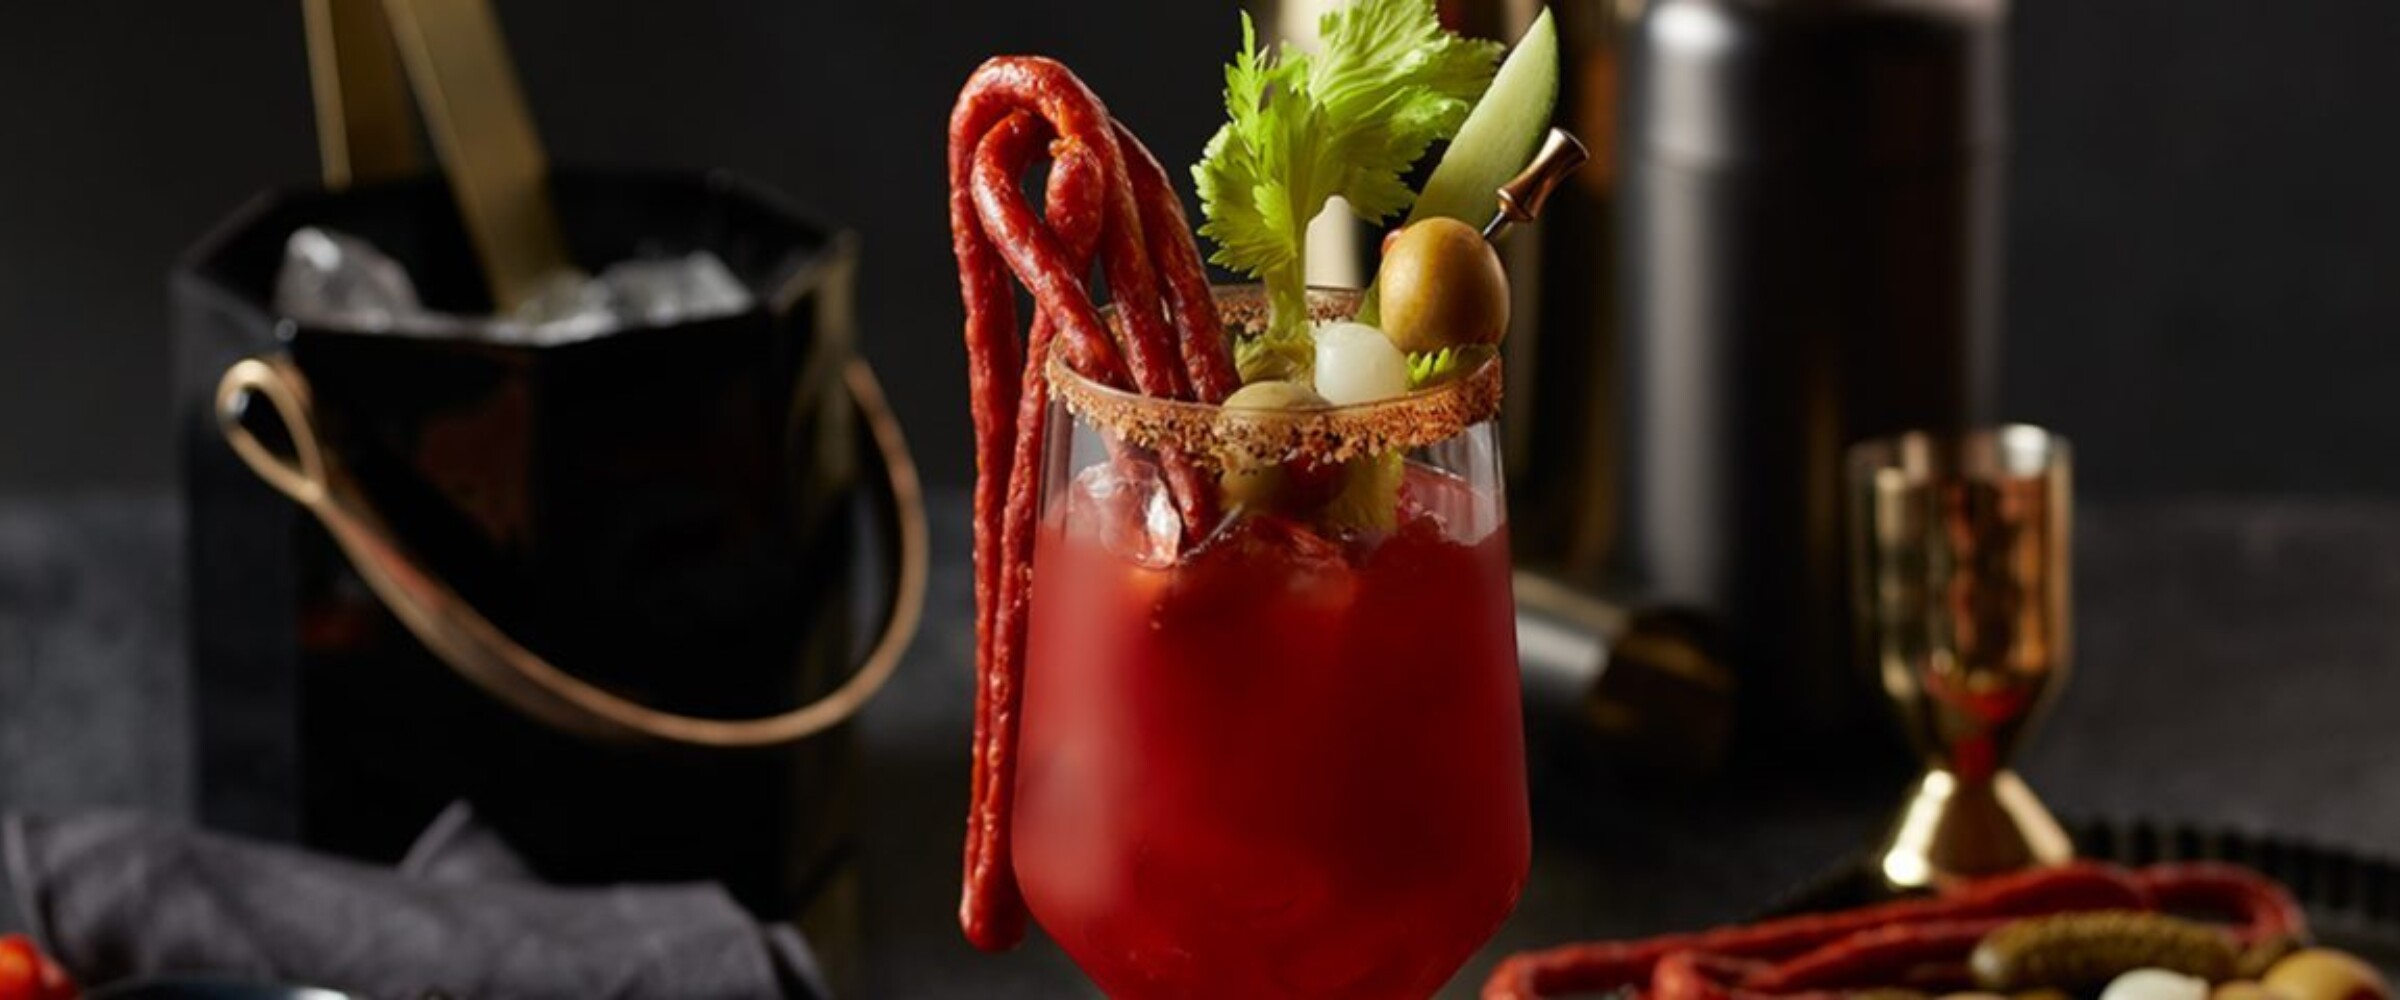 Bloody mary with salami whip, celery and olive garnishes